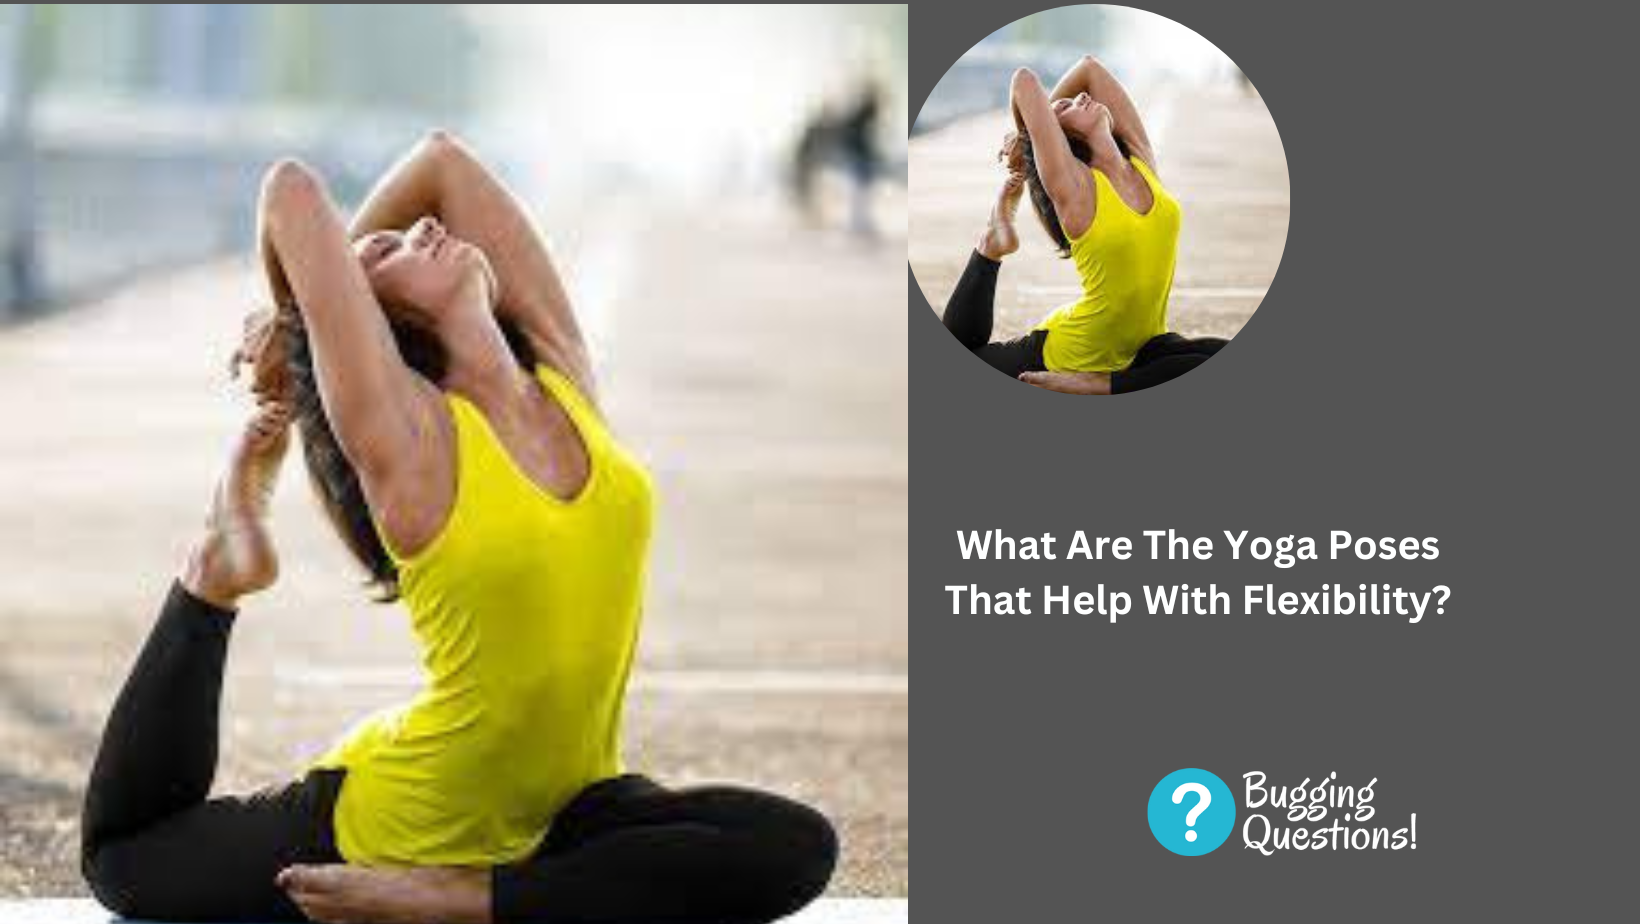 What Are The Yoga Poses That Help With Flexibility?